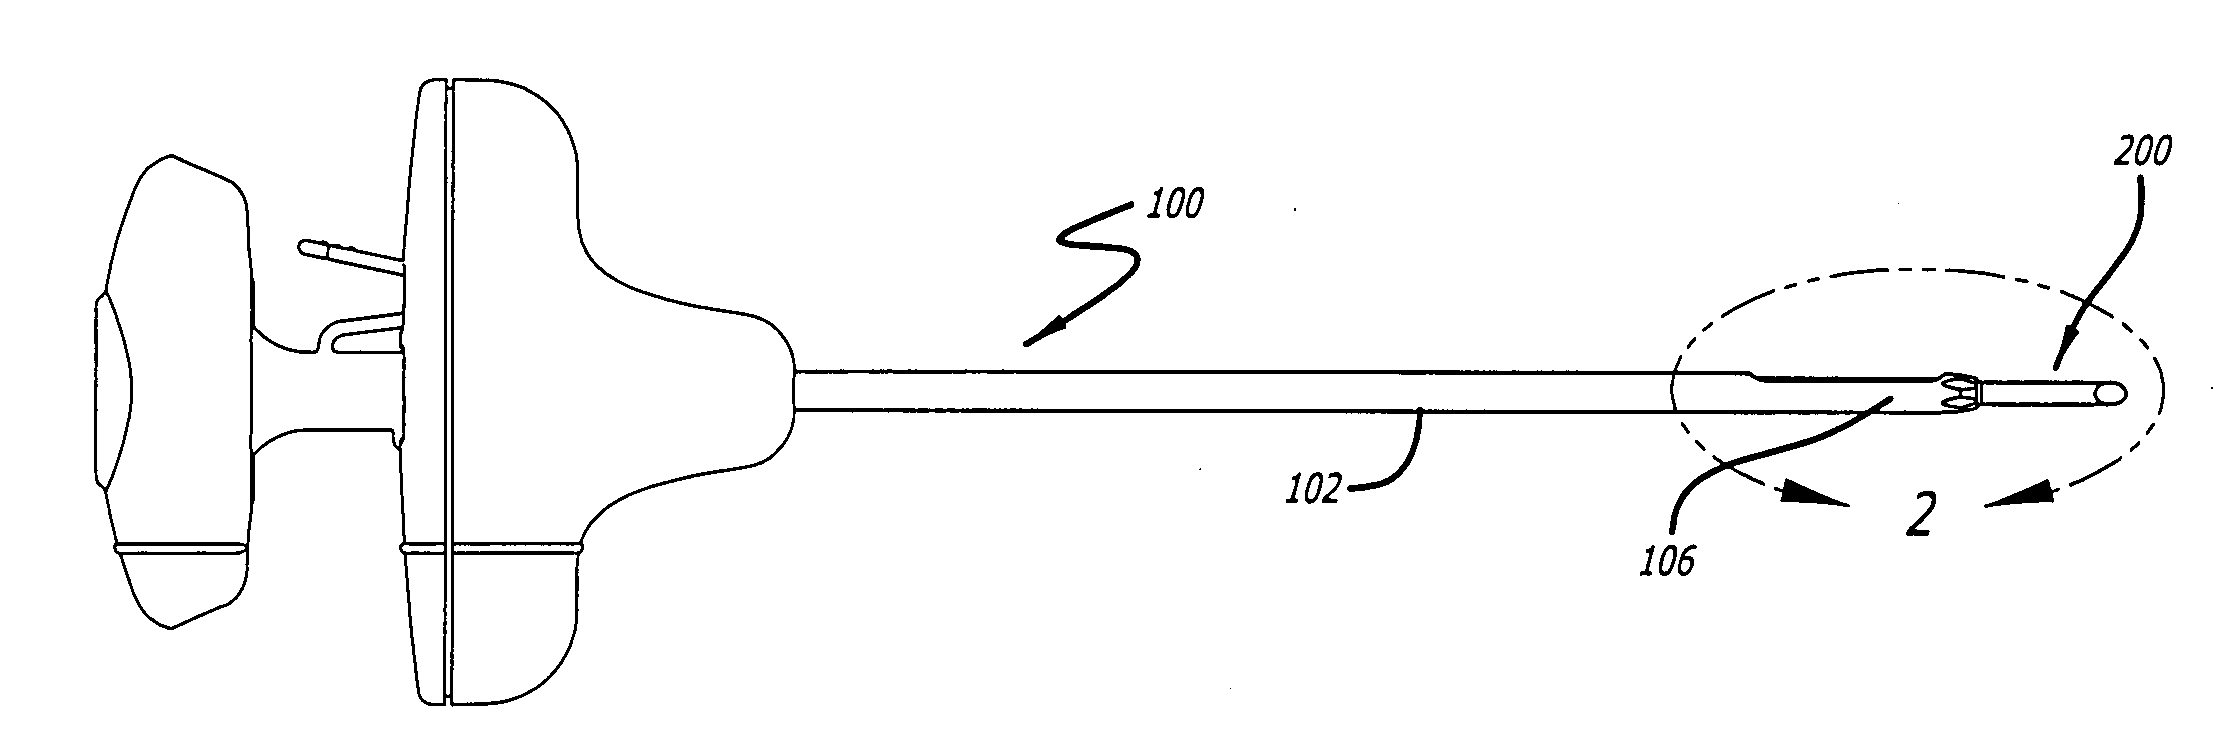 Method for use of dilating stylet and cannula